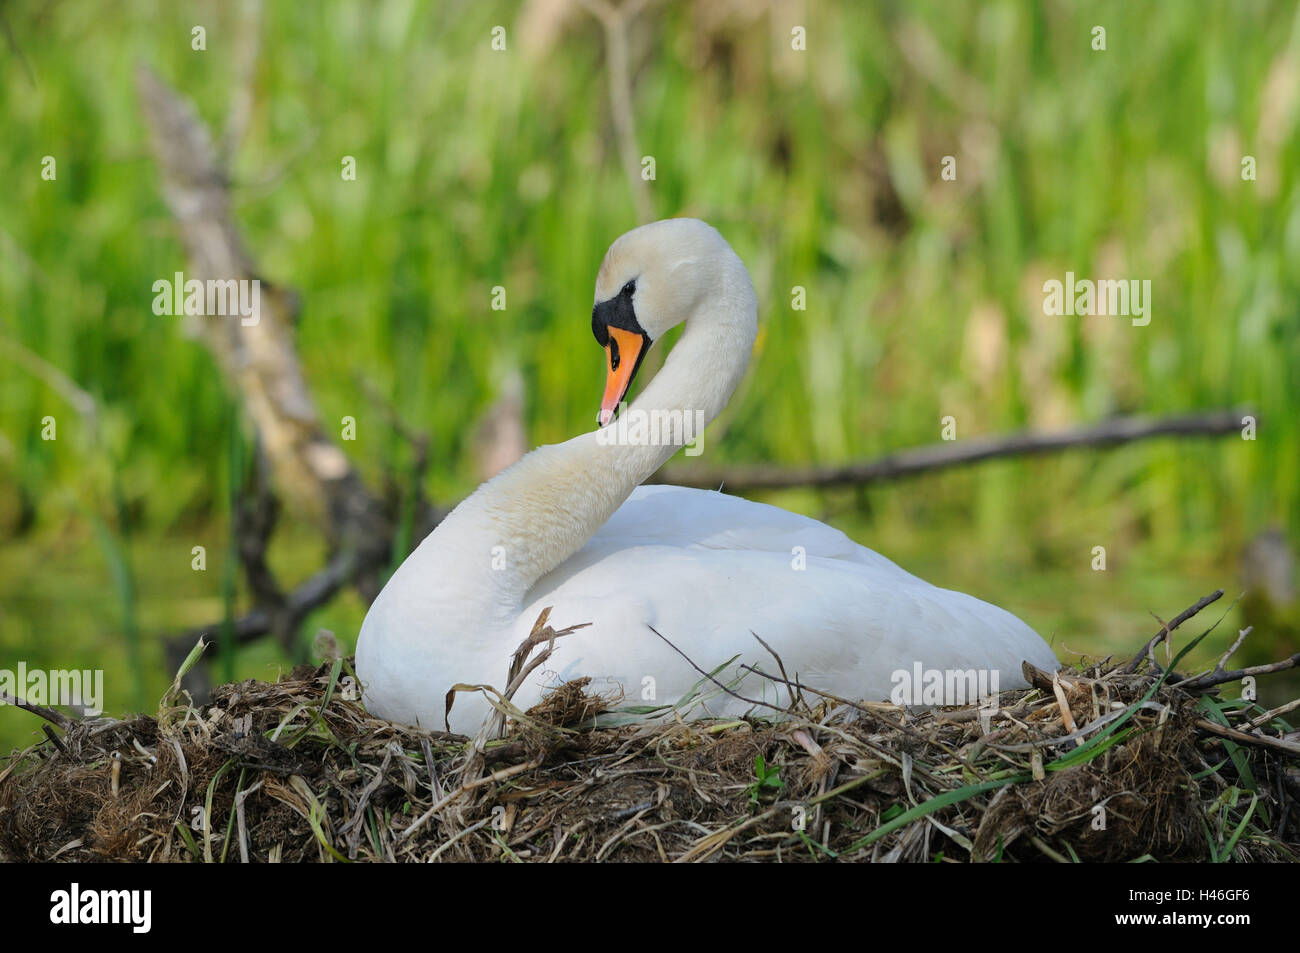 Mute swan, Cygnus olor, mother animal, nest, sitting, side view, Stock Photo